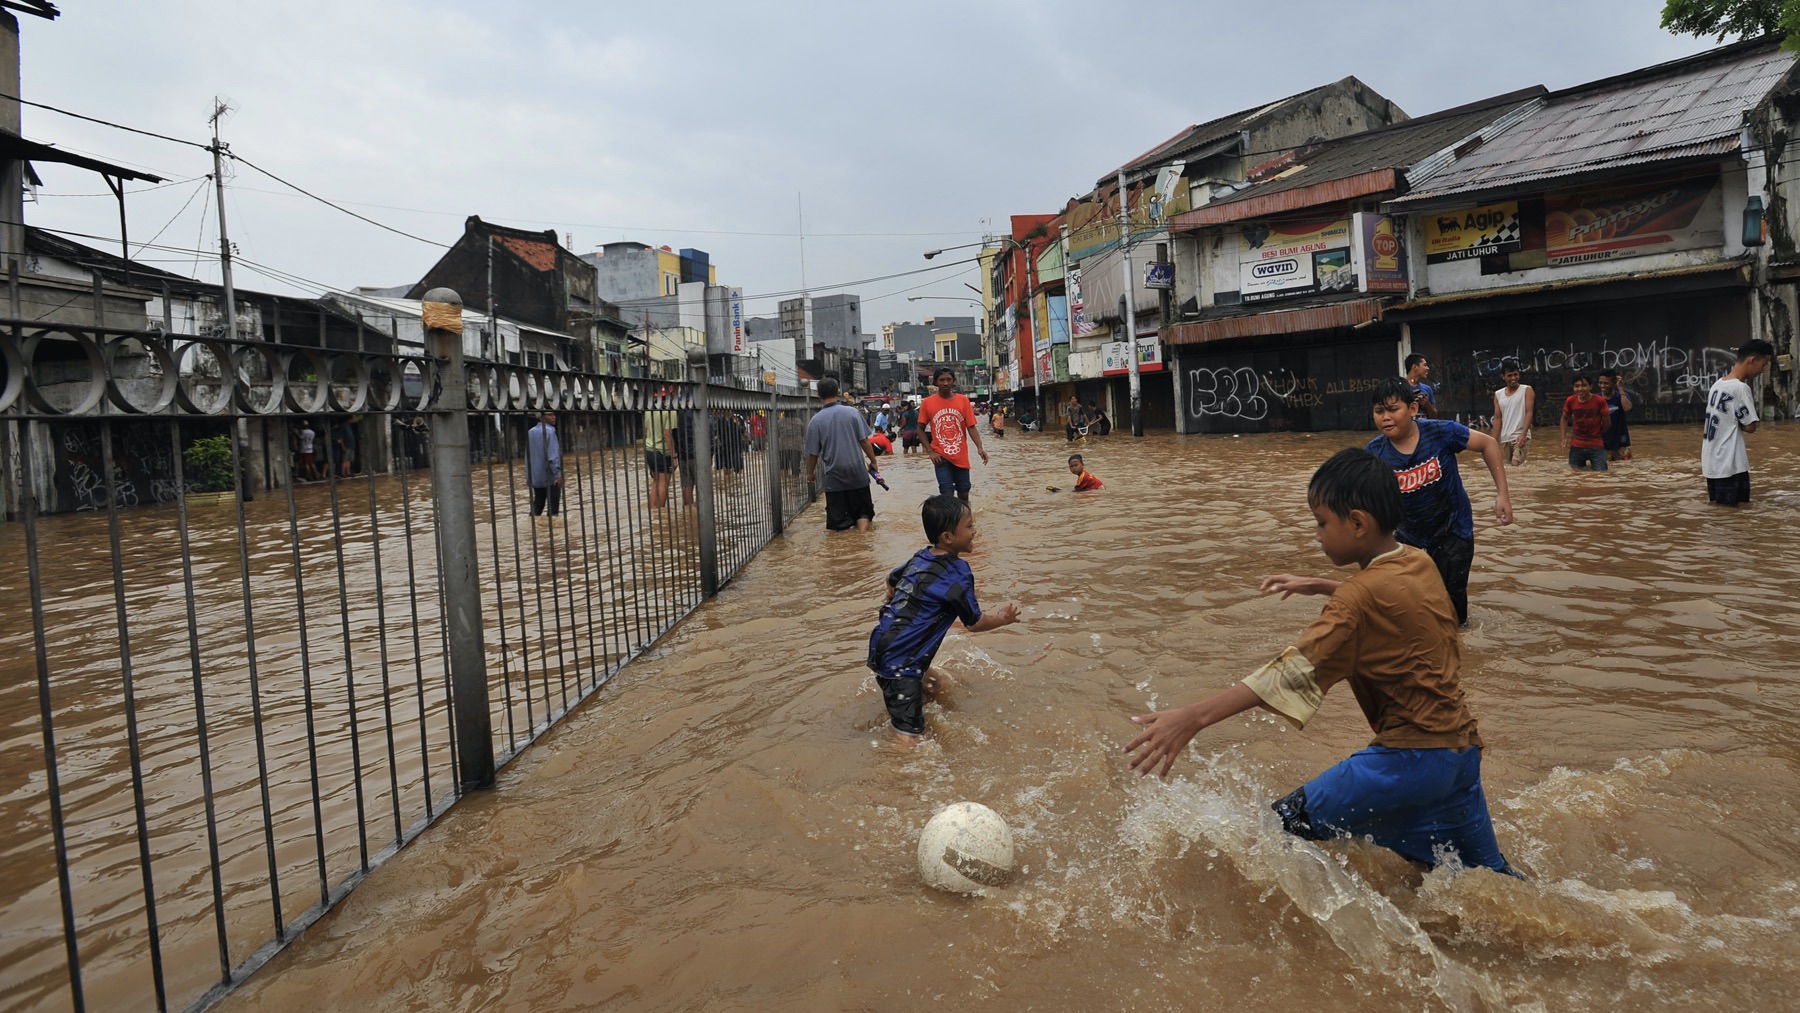 Children playing during the flood in Jakarta some time ago.